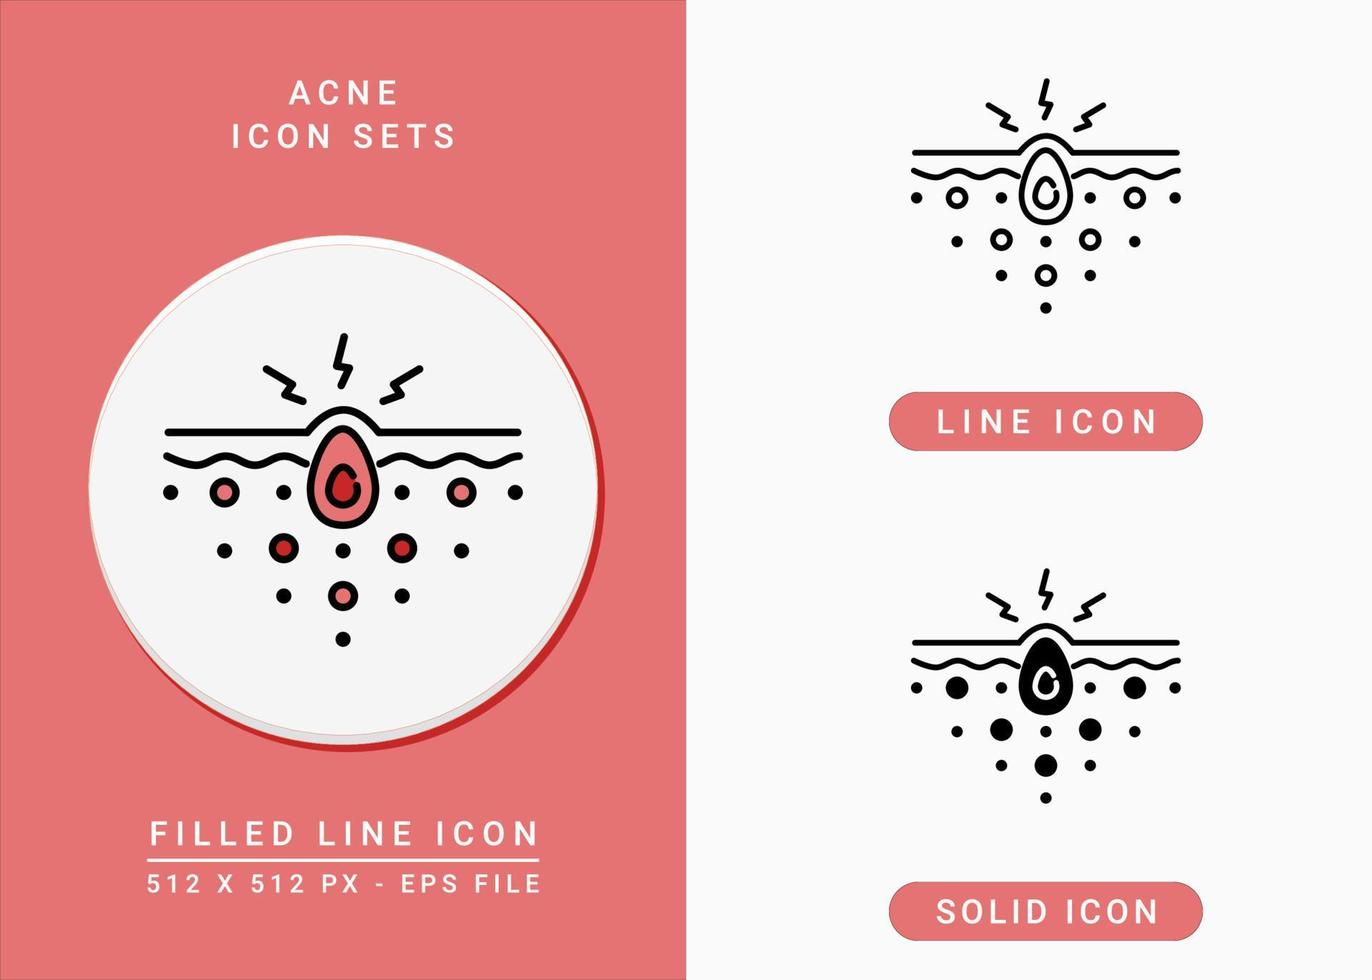 Acne icons set vector illustration with solid icon line style. Layer pore inflammation concept. Editable stroke icon on isolated background for web design, infographic and UI mobile app.